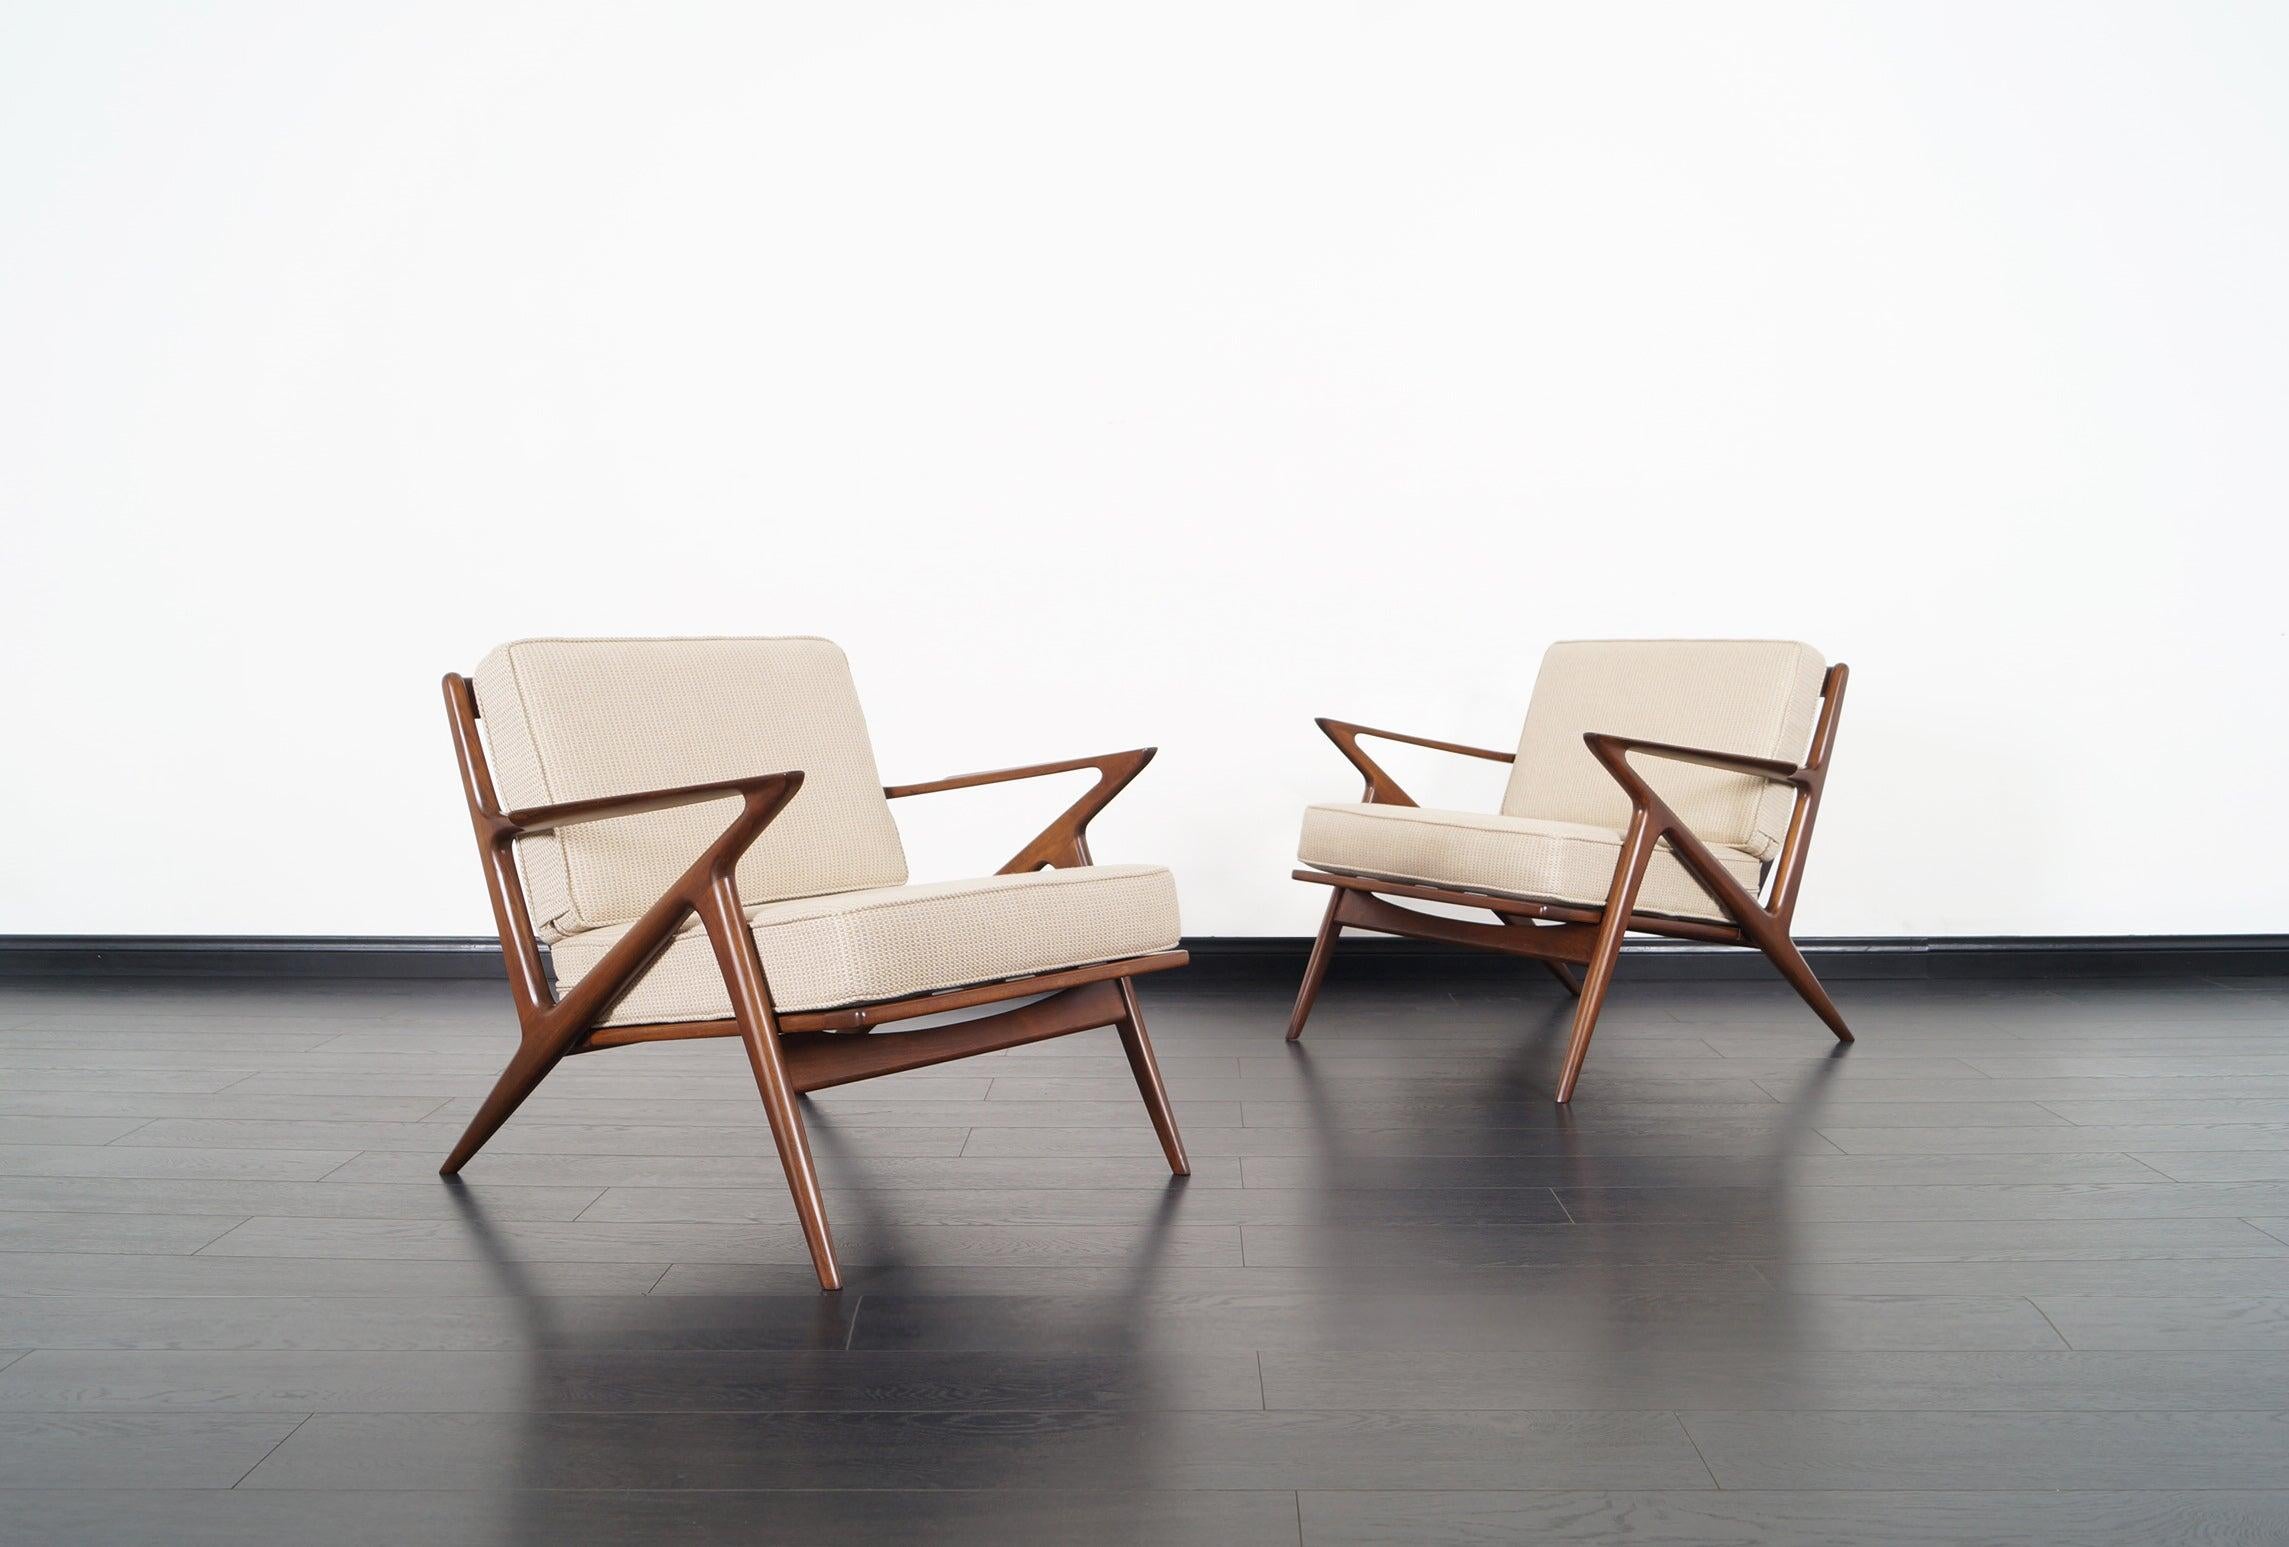 A stunning pair of Danish modern lounge chairs designed by Poul Jensen for Selig. Known as the 